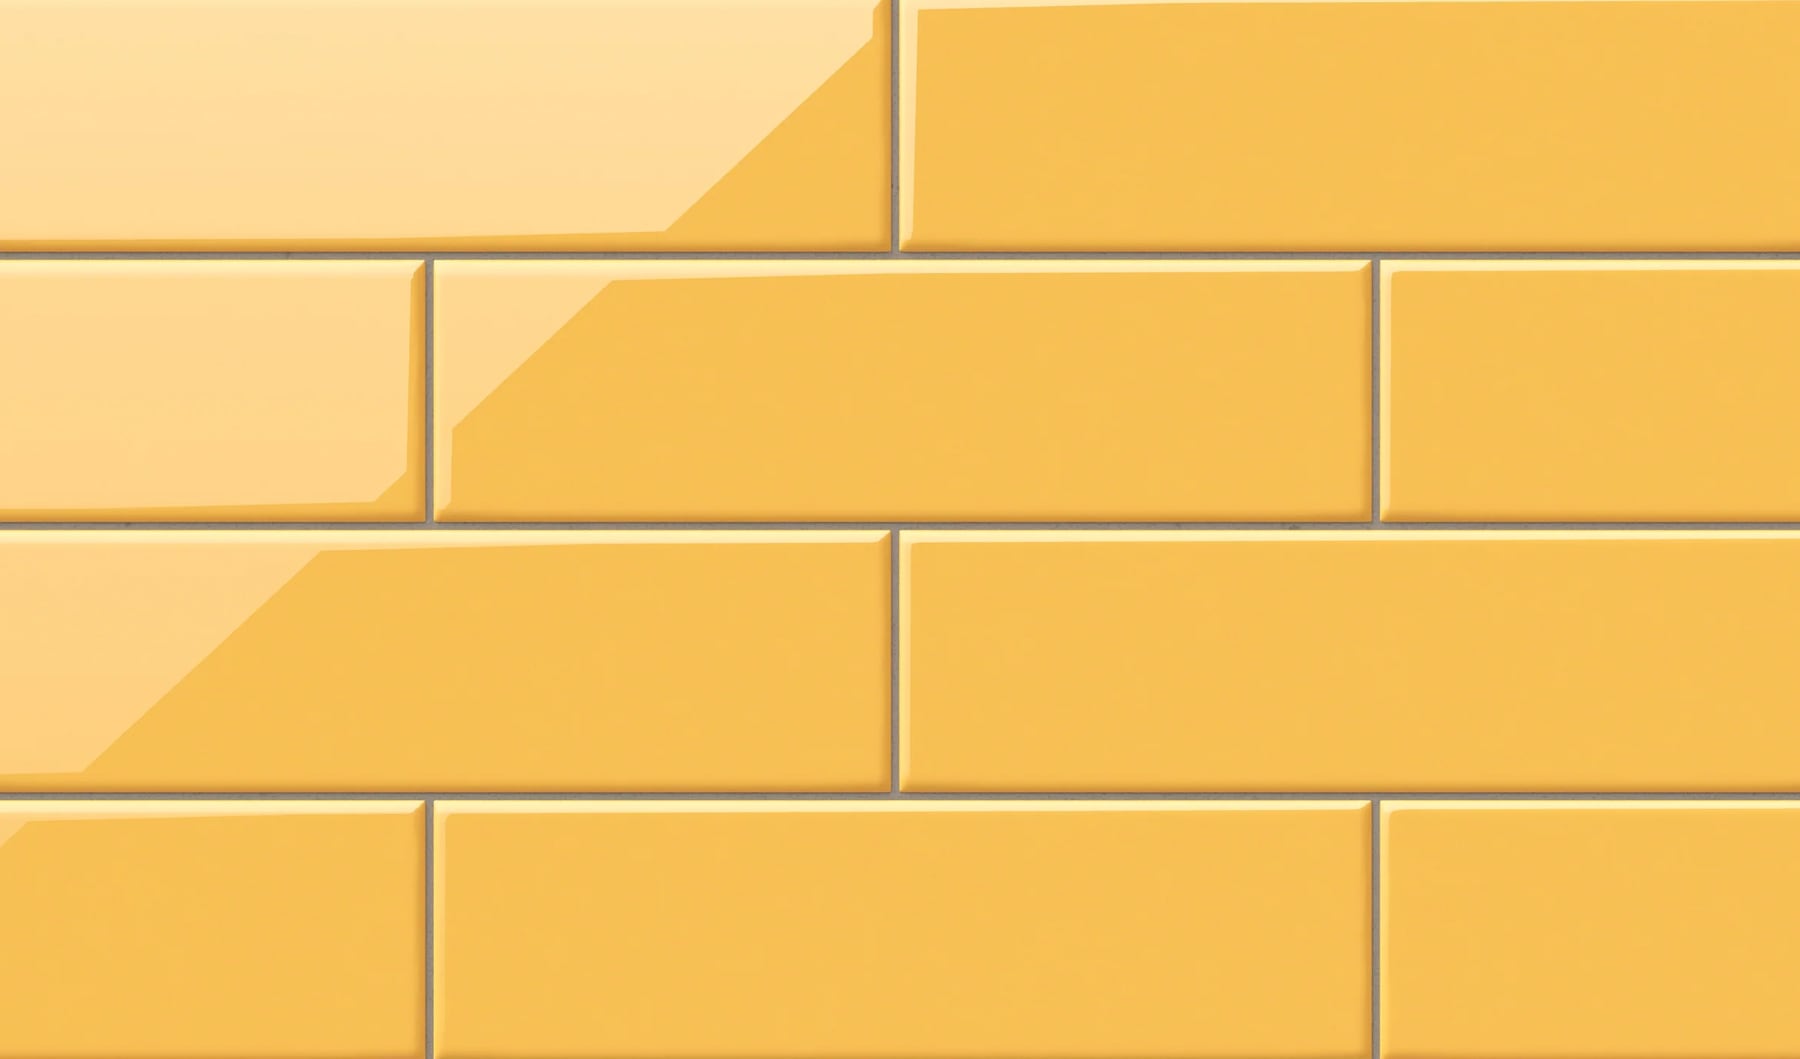 Glossy yellow tile in a clean subway pattern offers a bright, cheerful touch to any design space